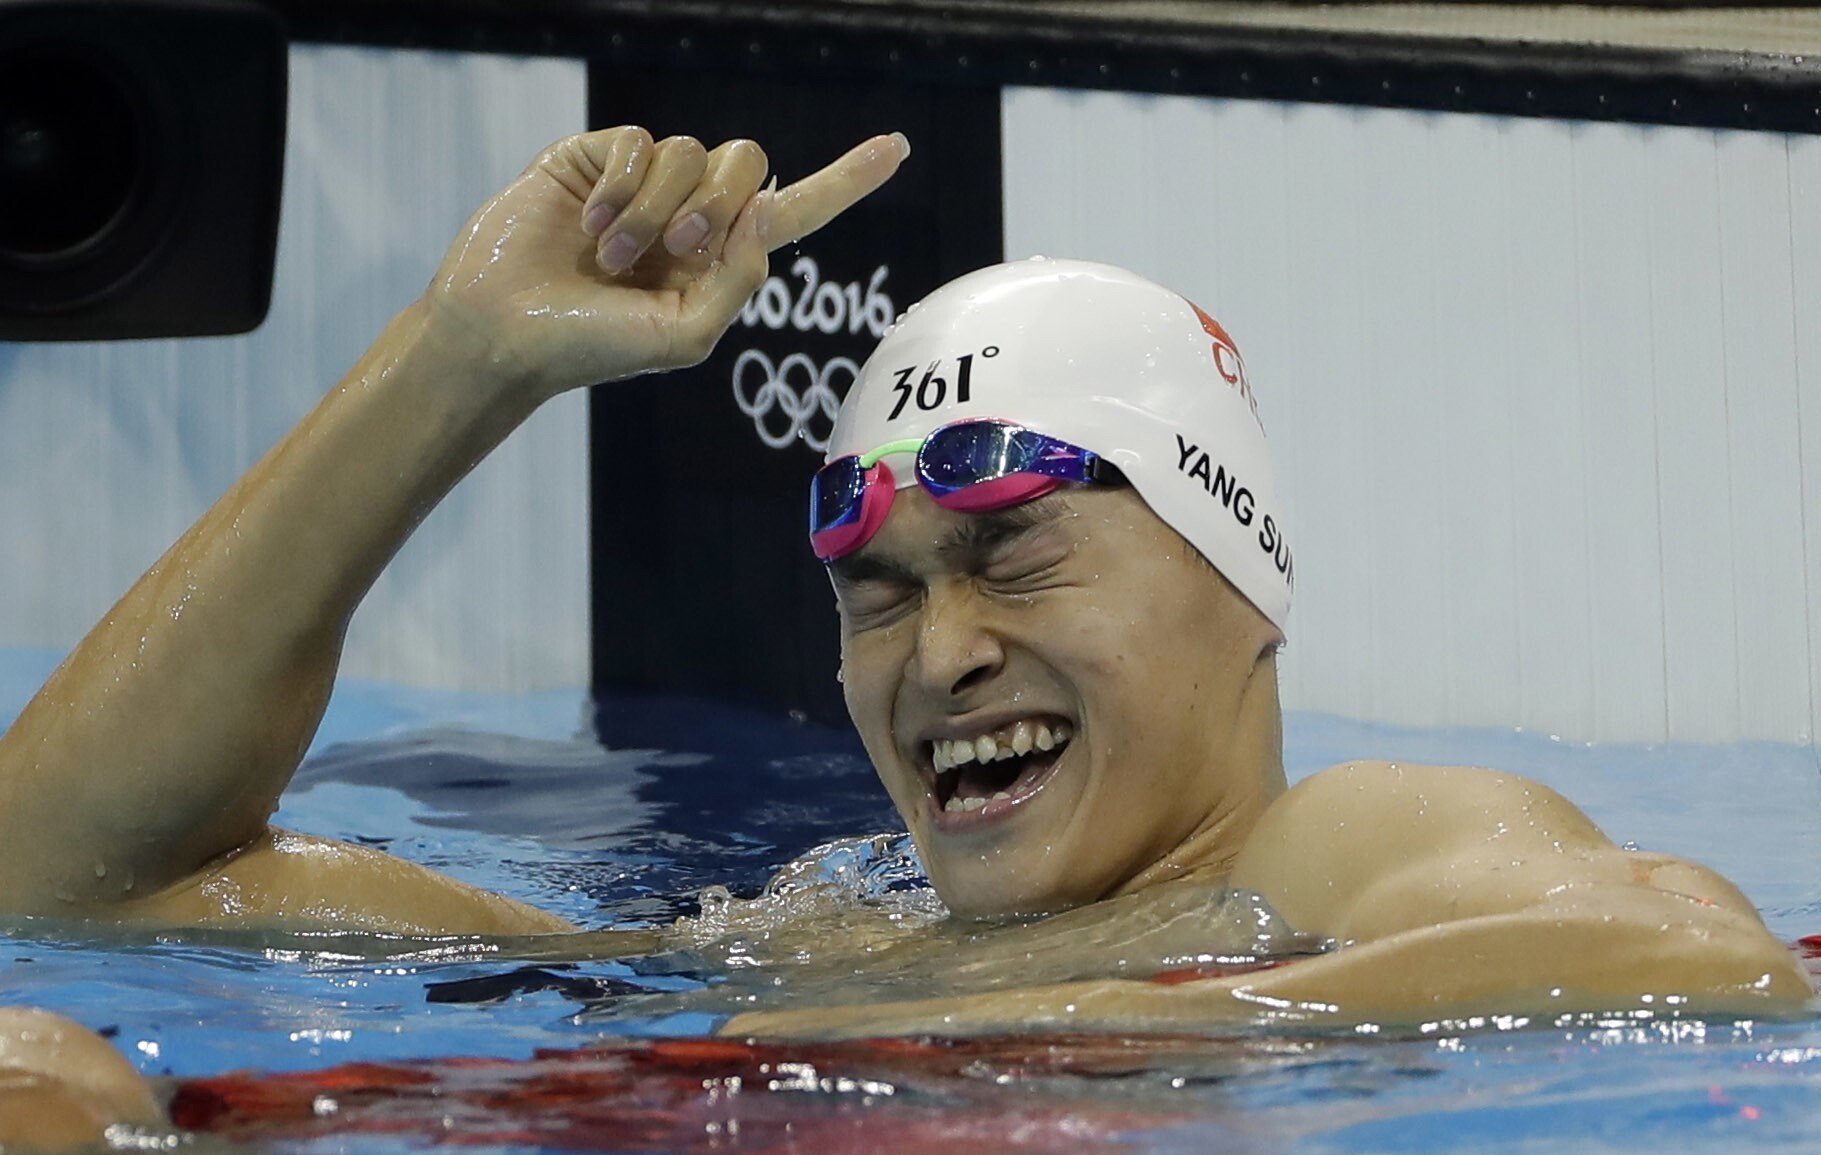 China’s Sun Yang celebrates winning the men's 200m freestyle during at the 2016 Olympics in Rio. Photo: AP